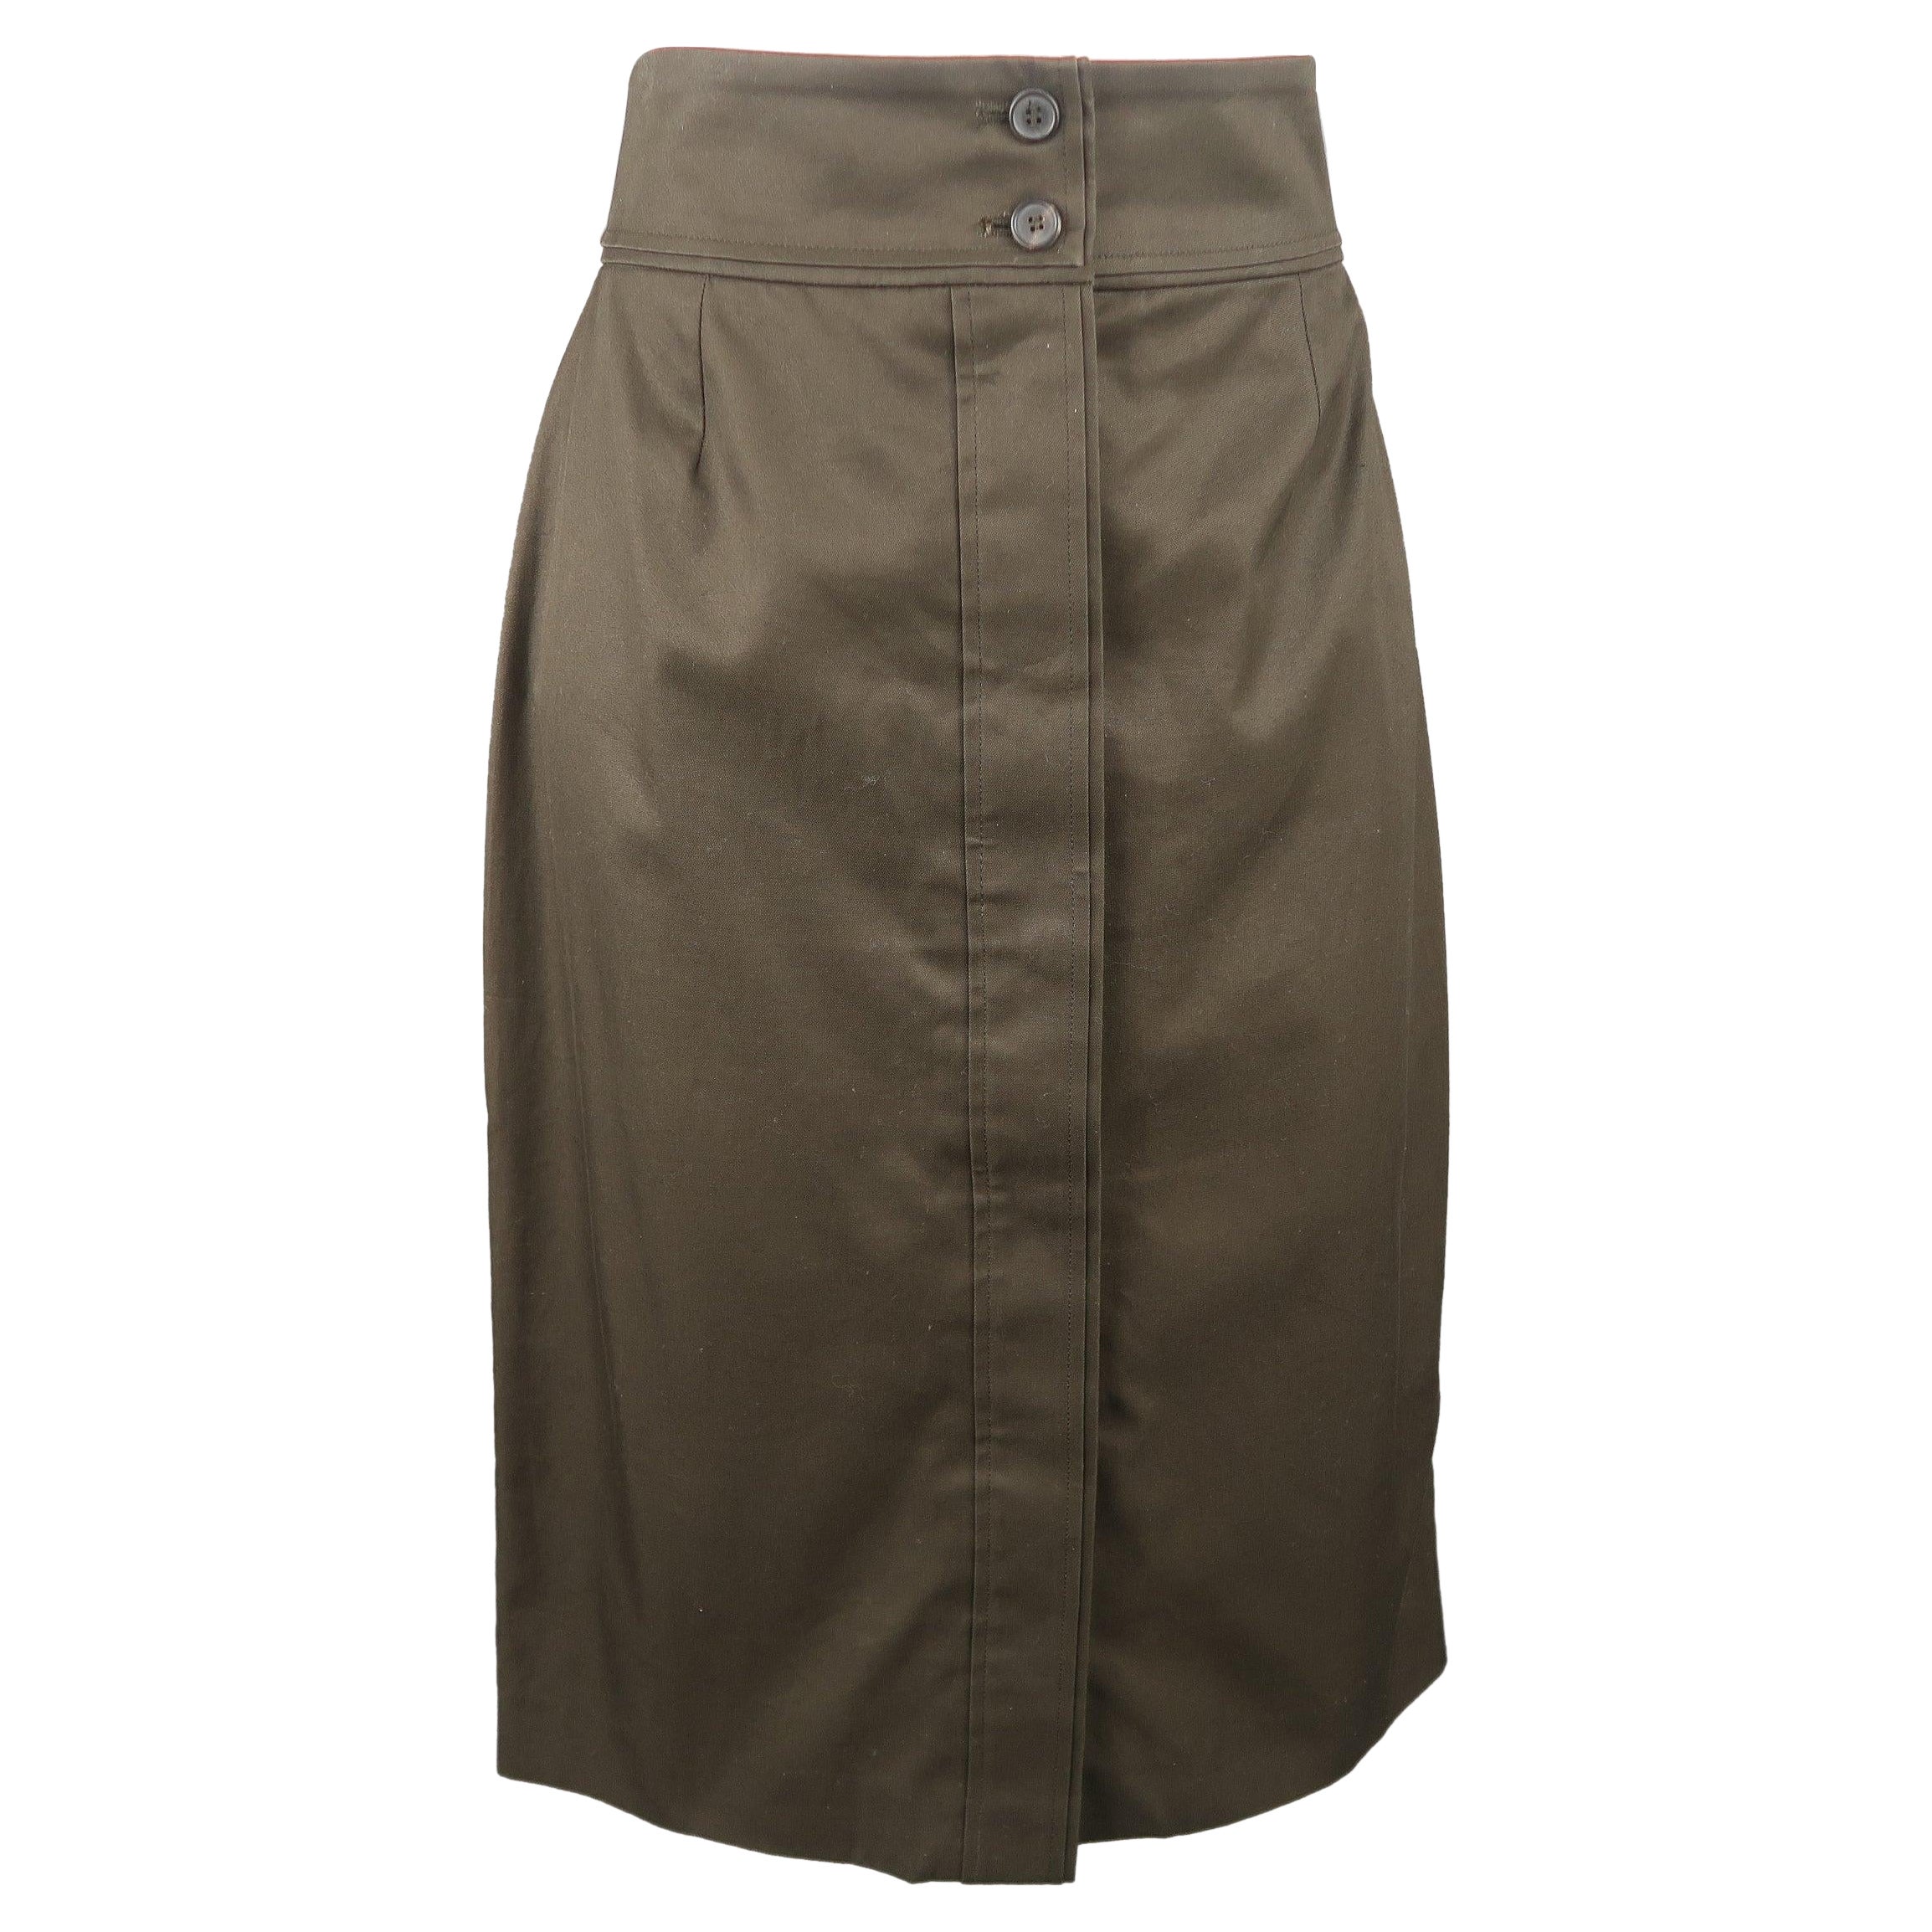 YVES SAINT LAURENT by TOM FORD Size 8 Dark Green Cotton Pencil Skirt For Sale